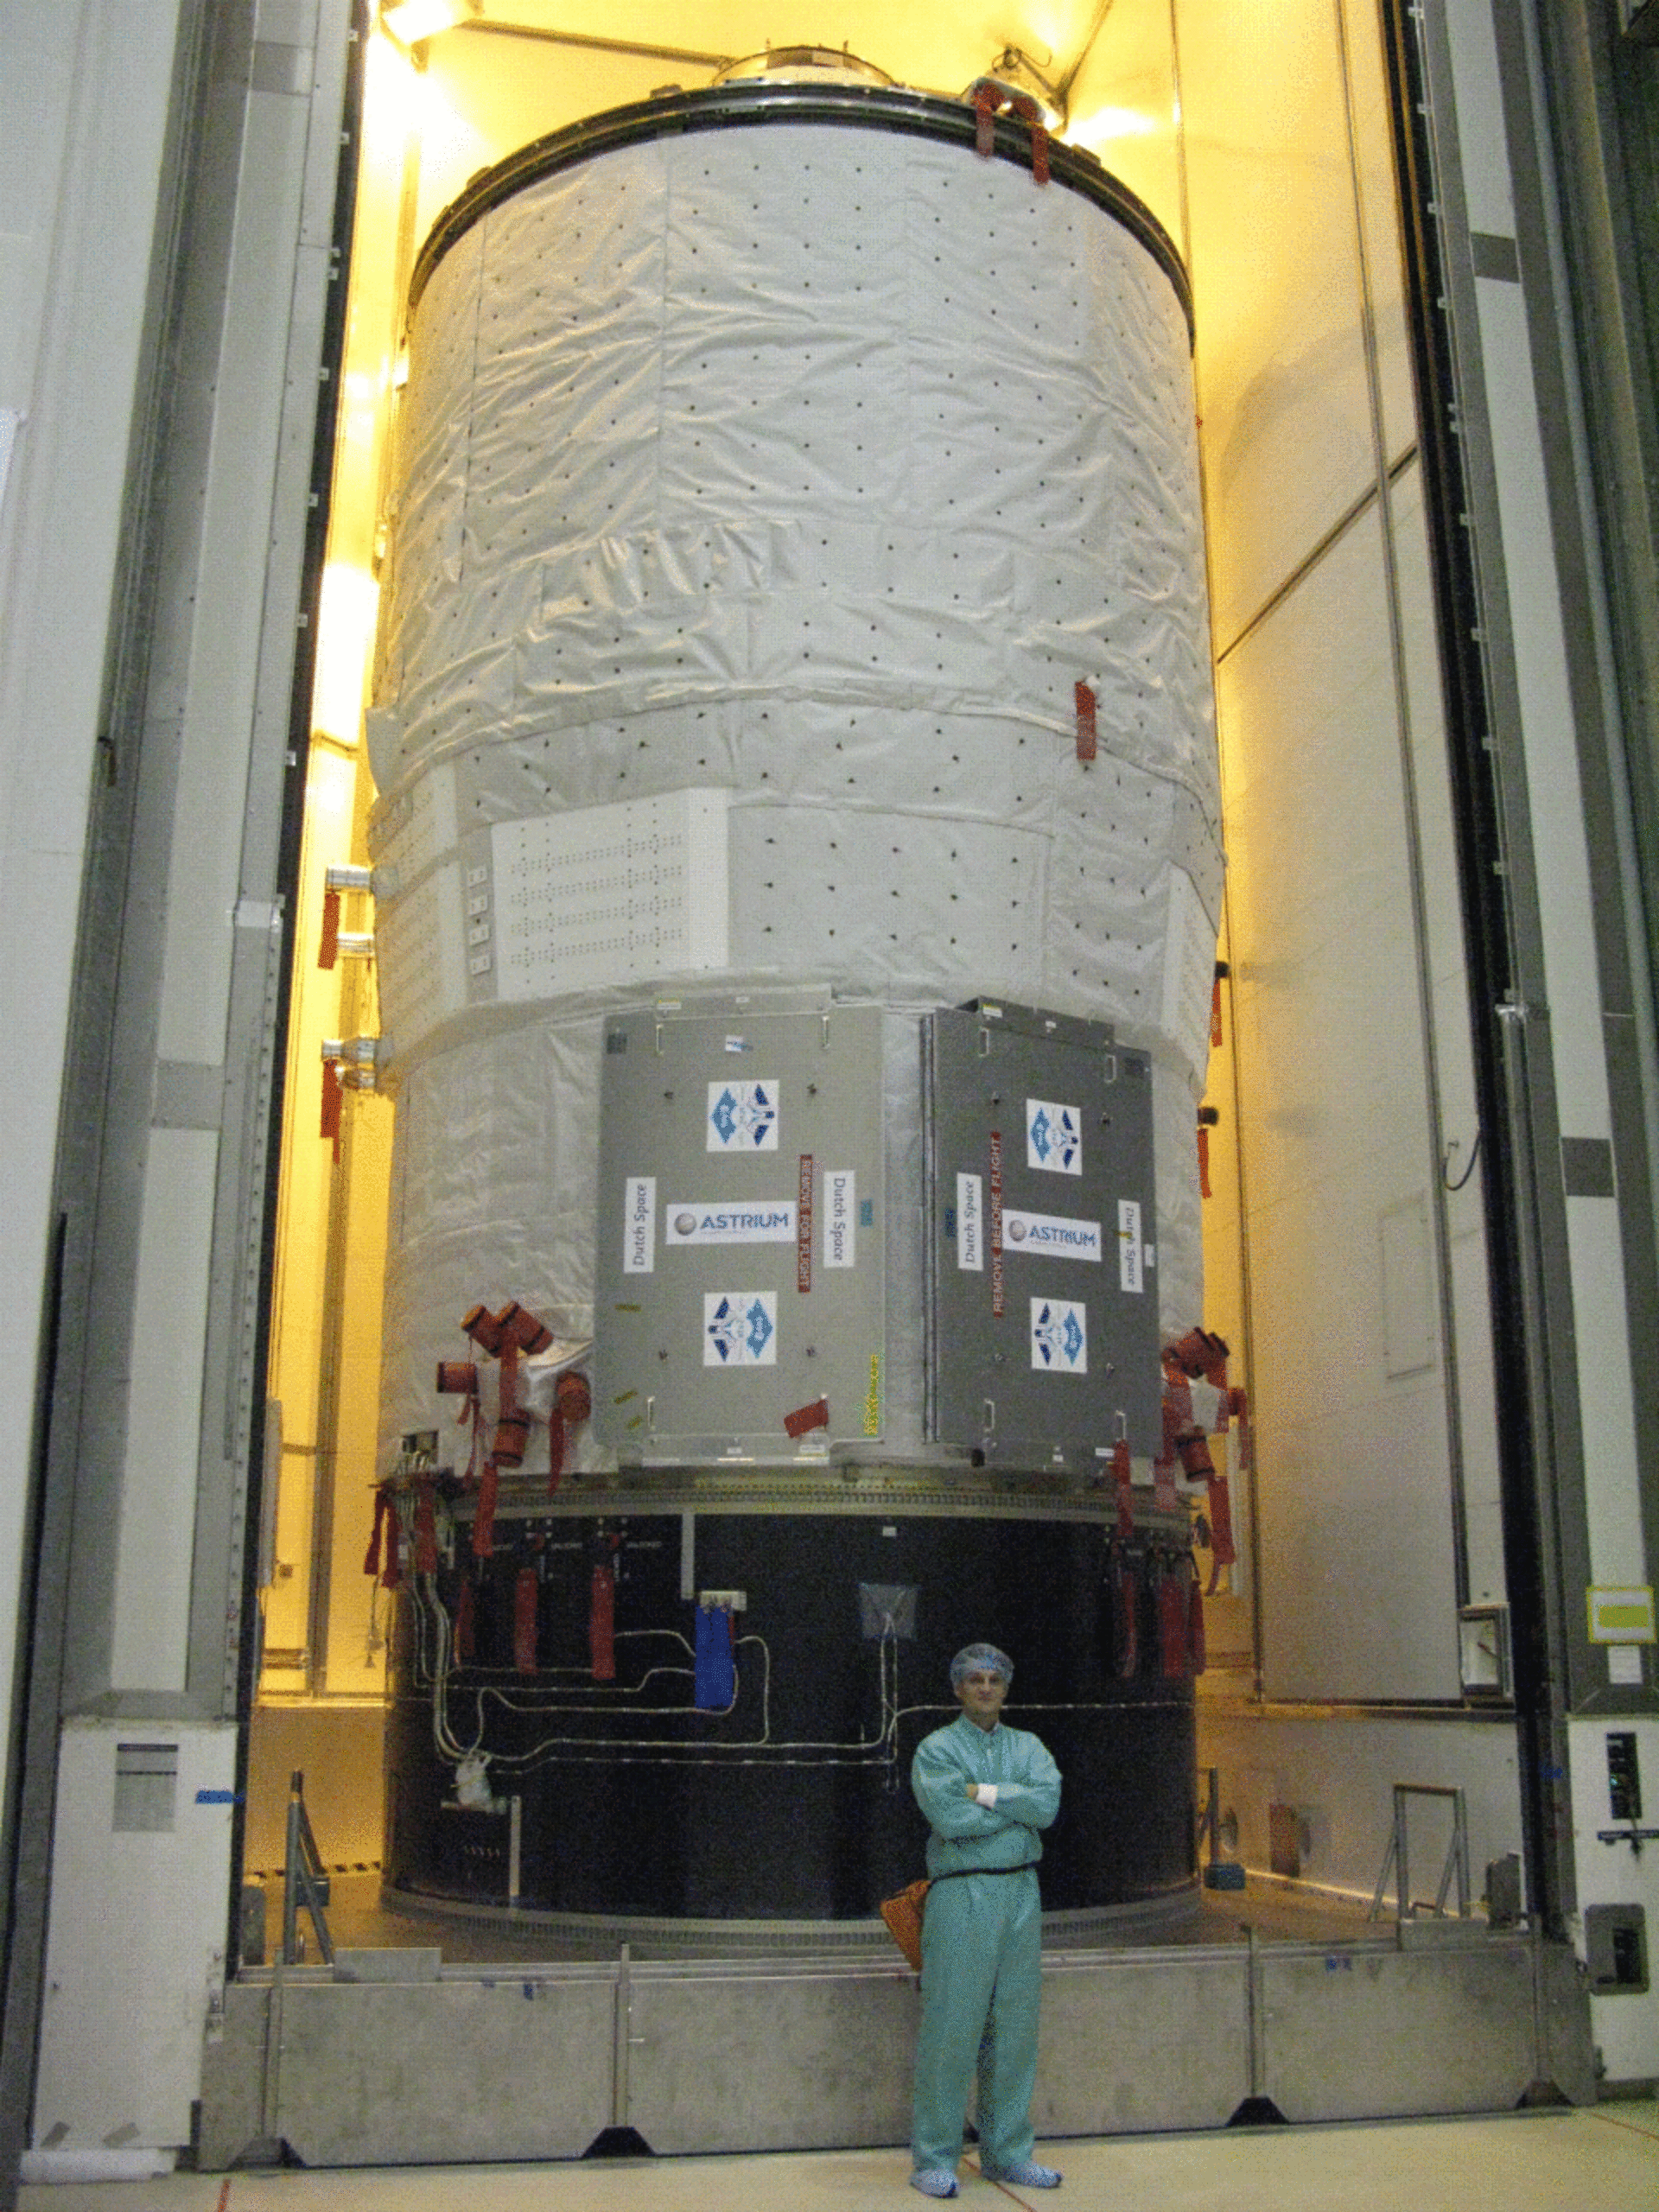 ATV Johannes Kepler mounted inside the CCU container for transport to the final assembly building